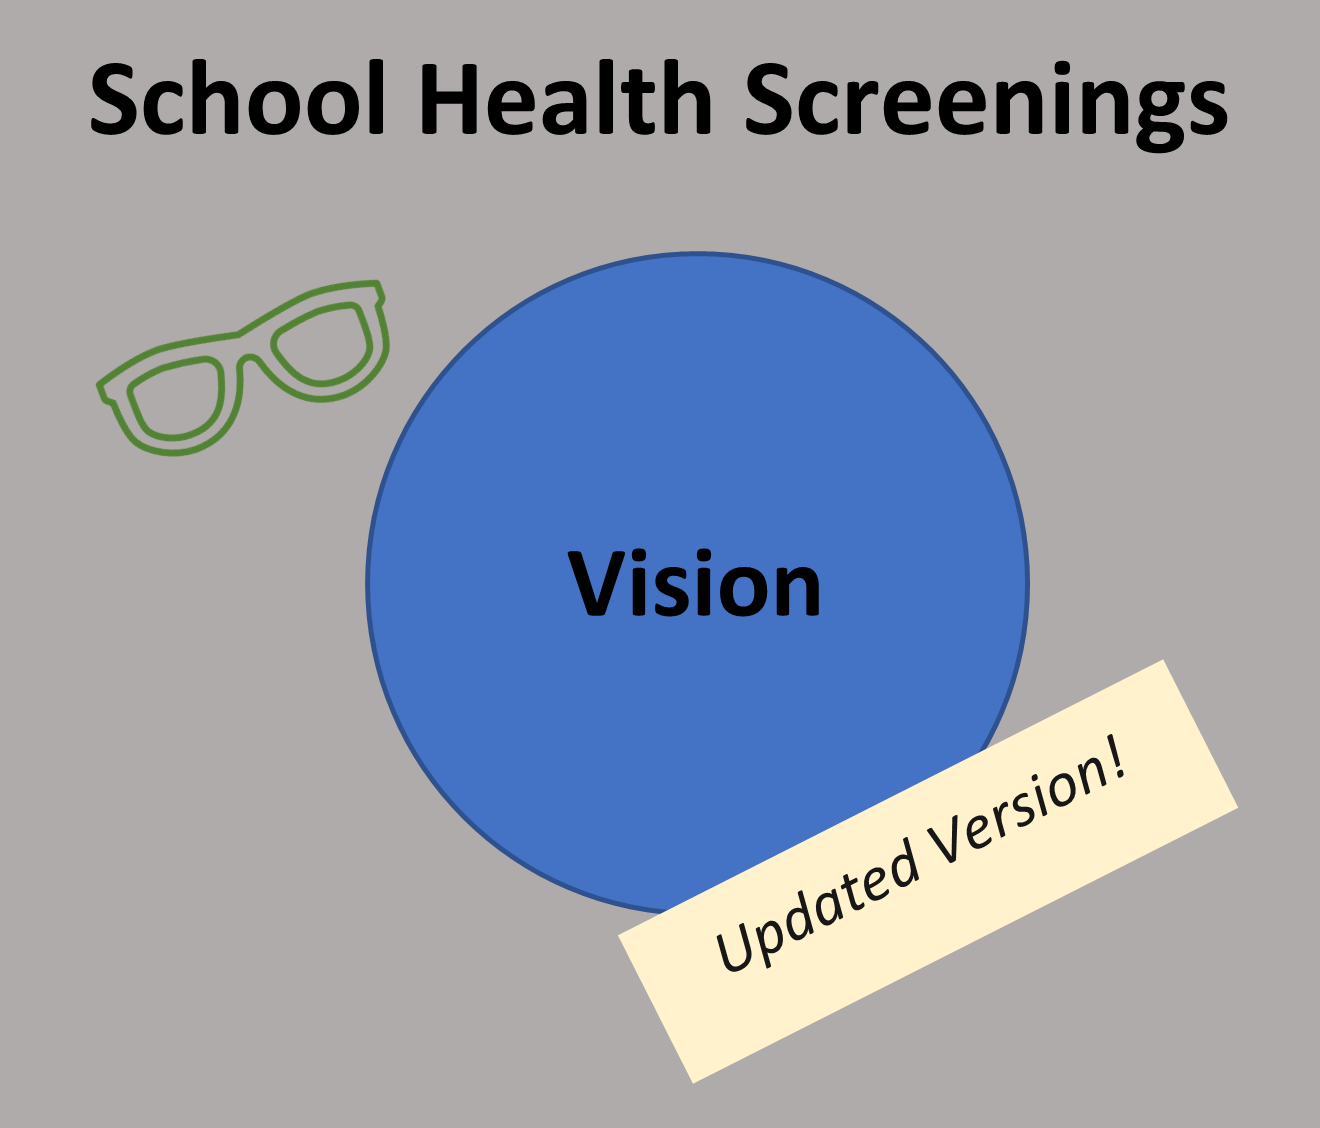 Gray background with school health screening title, blue circle on the center with the word "vision" inside. A yellow box has text stating updated version!